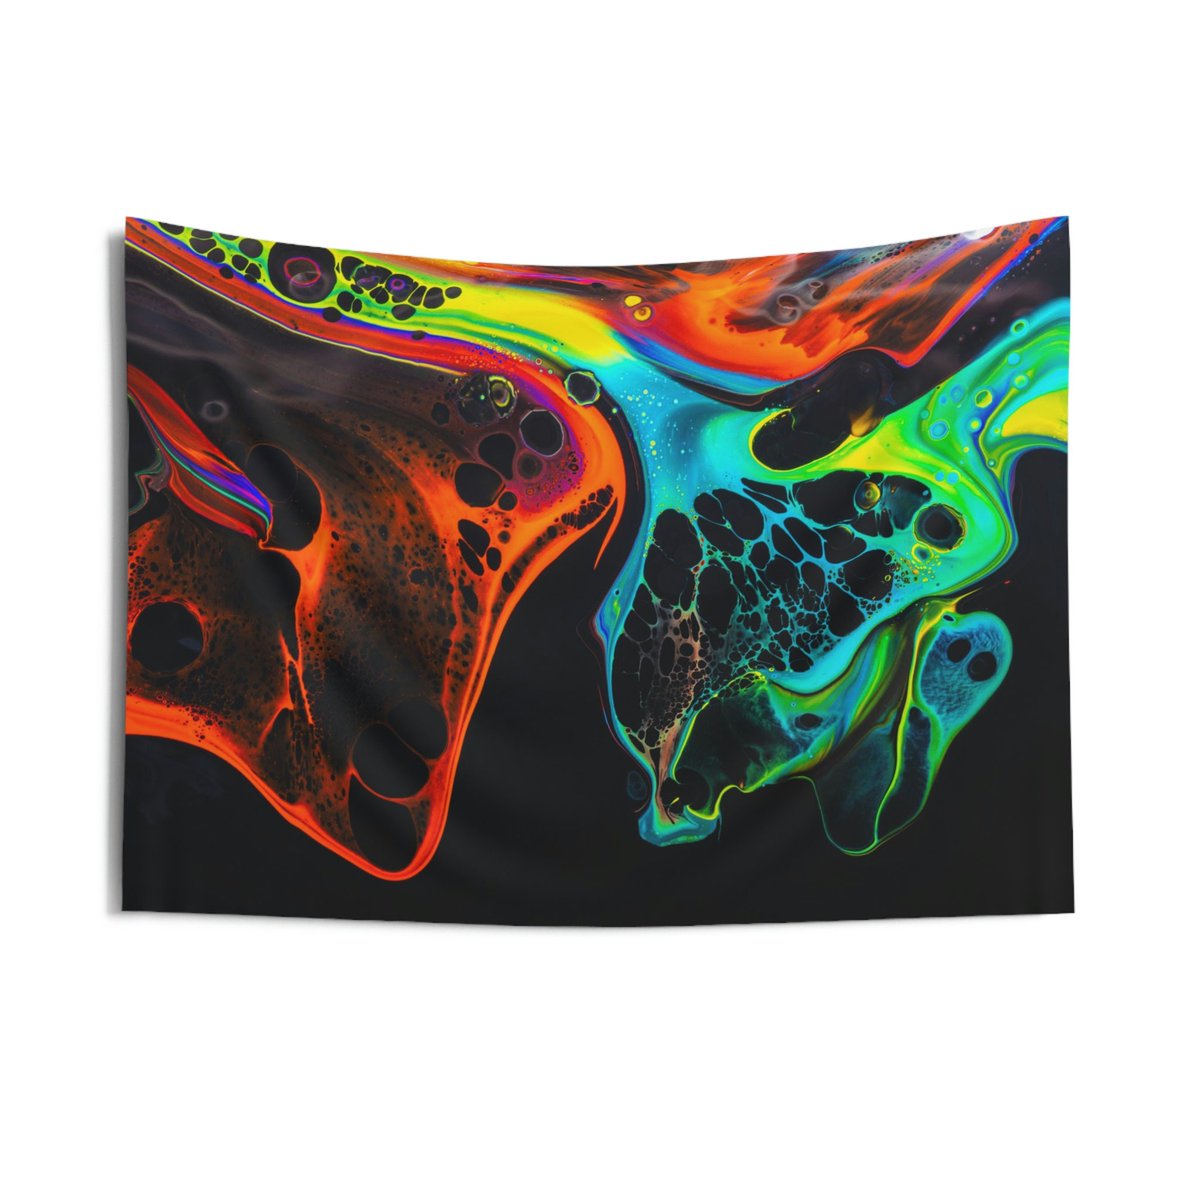 Psychedelic Trippy Hippy Indoor Wall Tapestry, Wall Decor, Wall Office Dorm Art etsy.me/41cAQSh #walltapestry #polyester #trippy #trippytapestry #homedecor #wallart #collegestudent #psychedelic #psychedelia